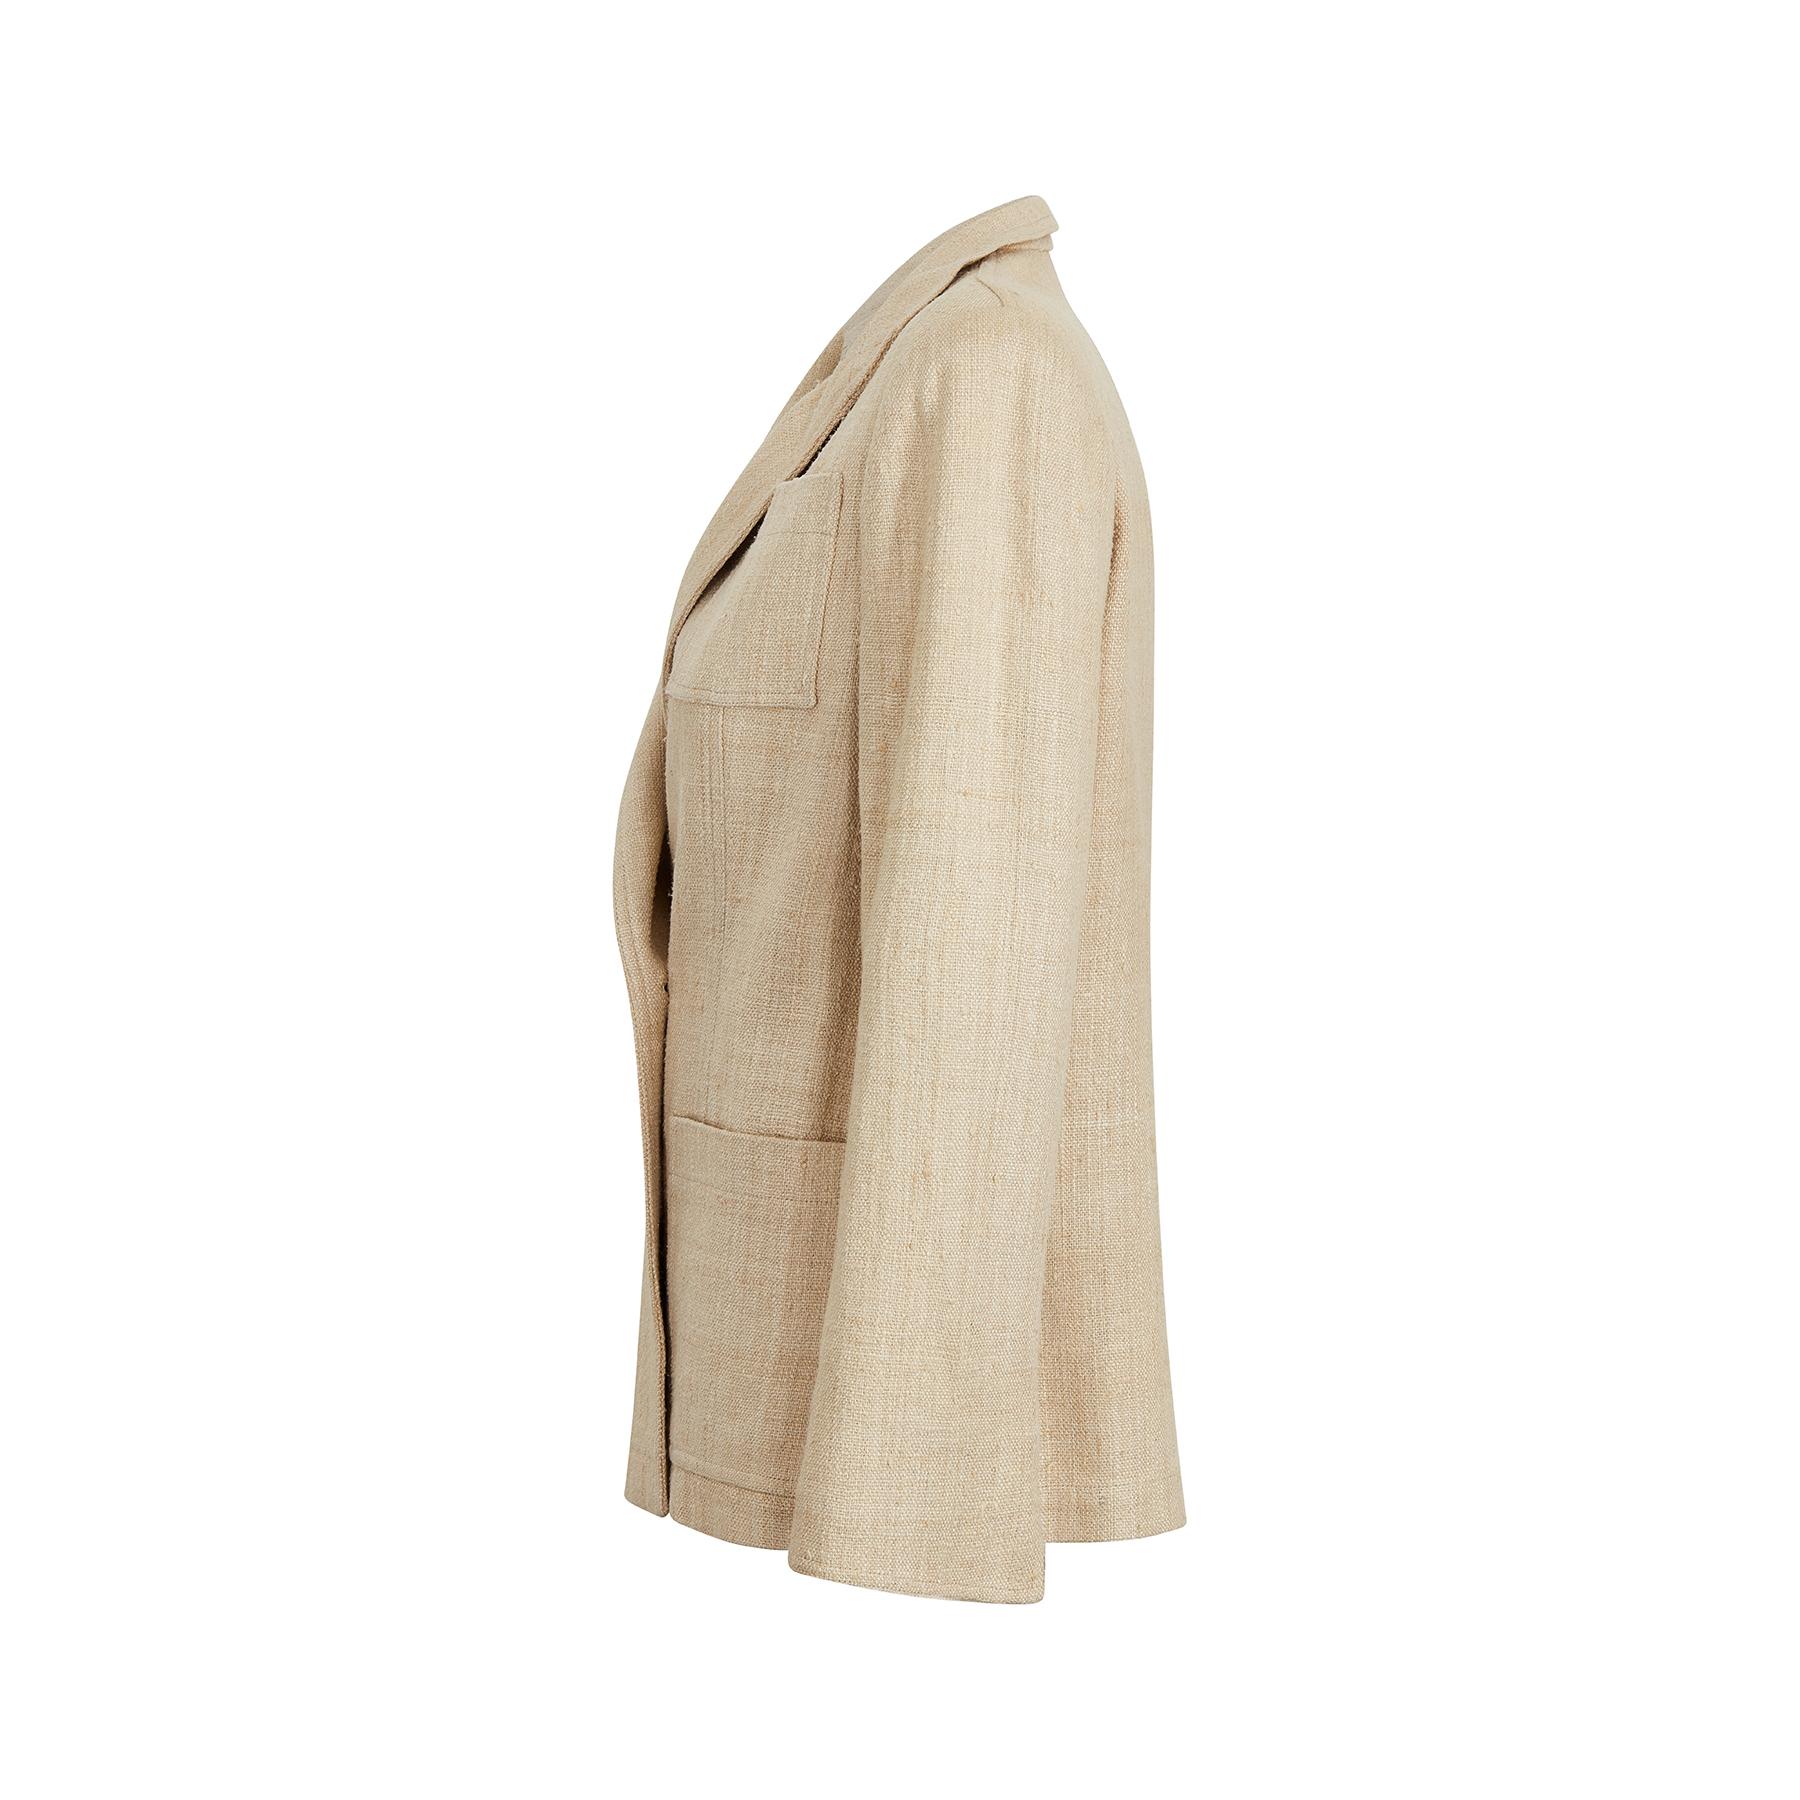 Christian Dior Boutique oatmeal silk blazer jacket. This is a really good example of the double-breasted sports jackets that were fashionable in the late 1980s and early 1990s and it's a timeless style. It is made from the finest quality